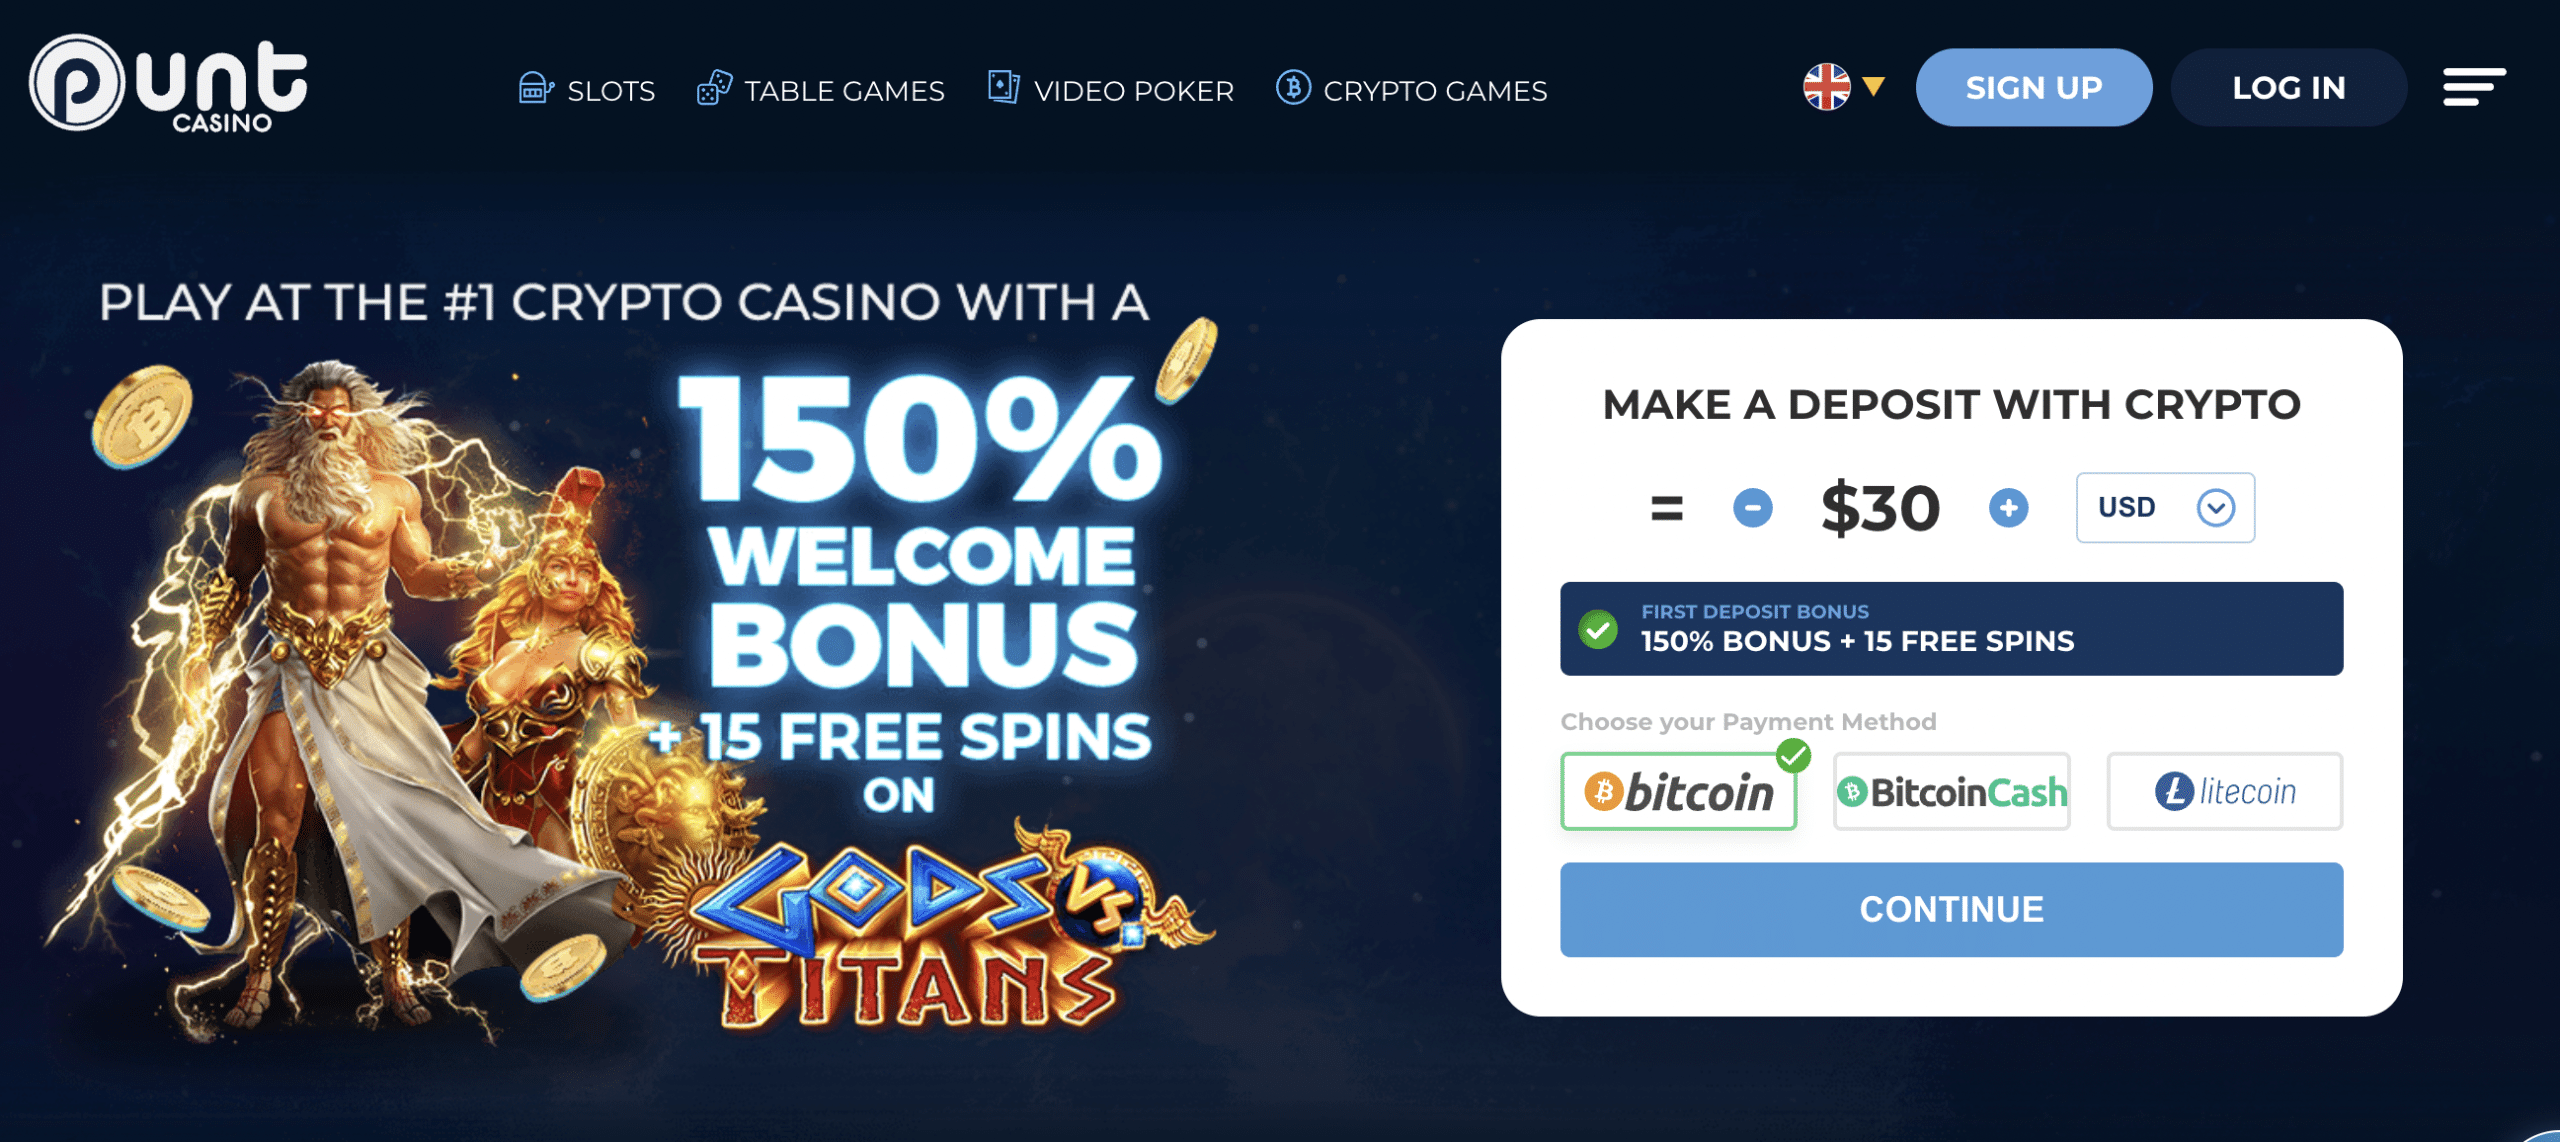 Punt Casino review